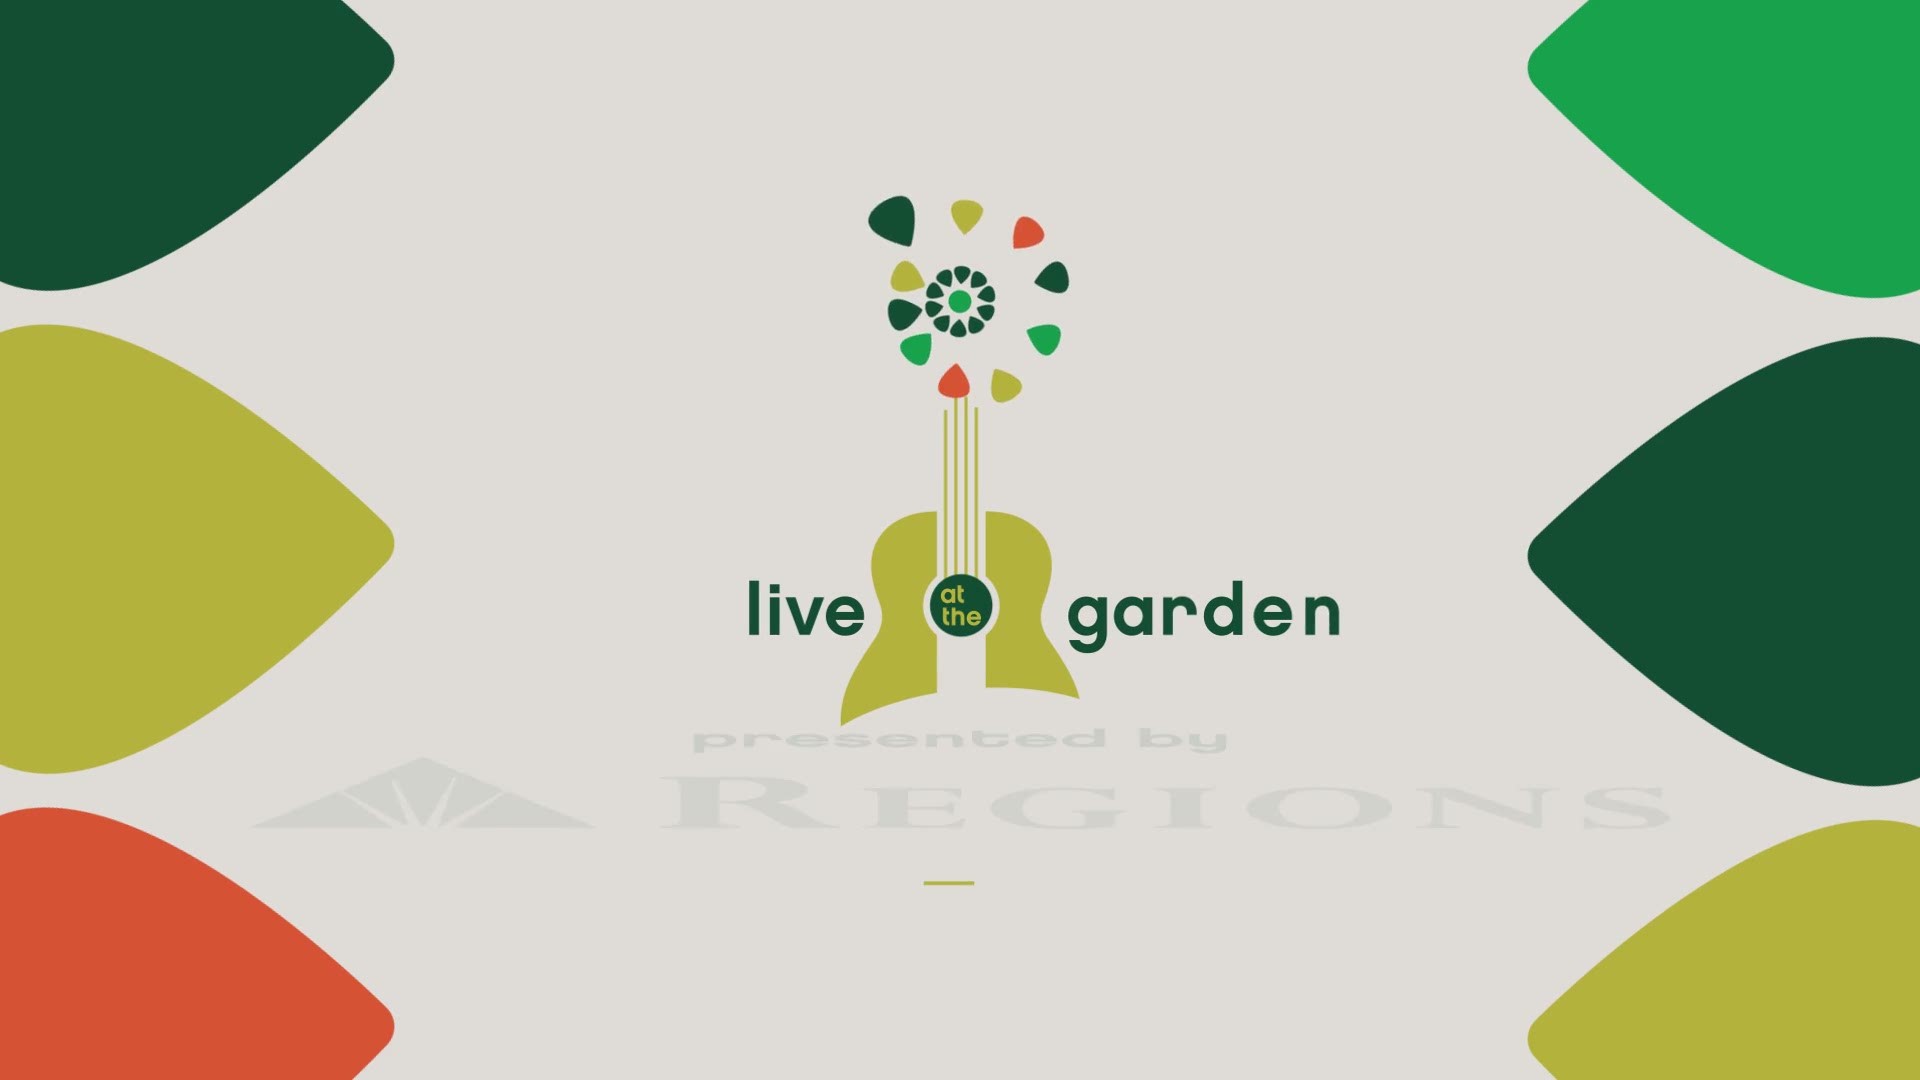 The live music series at the Memphis Botanic Garden kicks off July 17th with Little Big Town. Other acts include Brad Paisley, Sheryl Crow, and Earth, Wind & Fire.